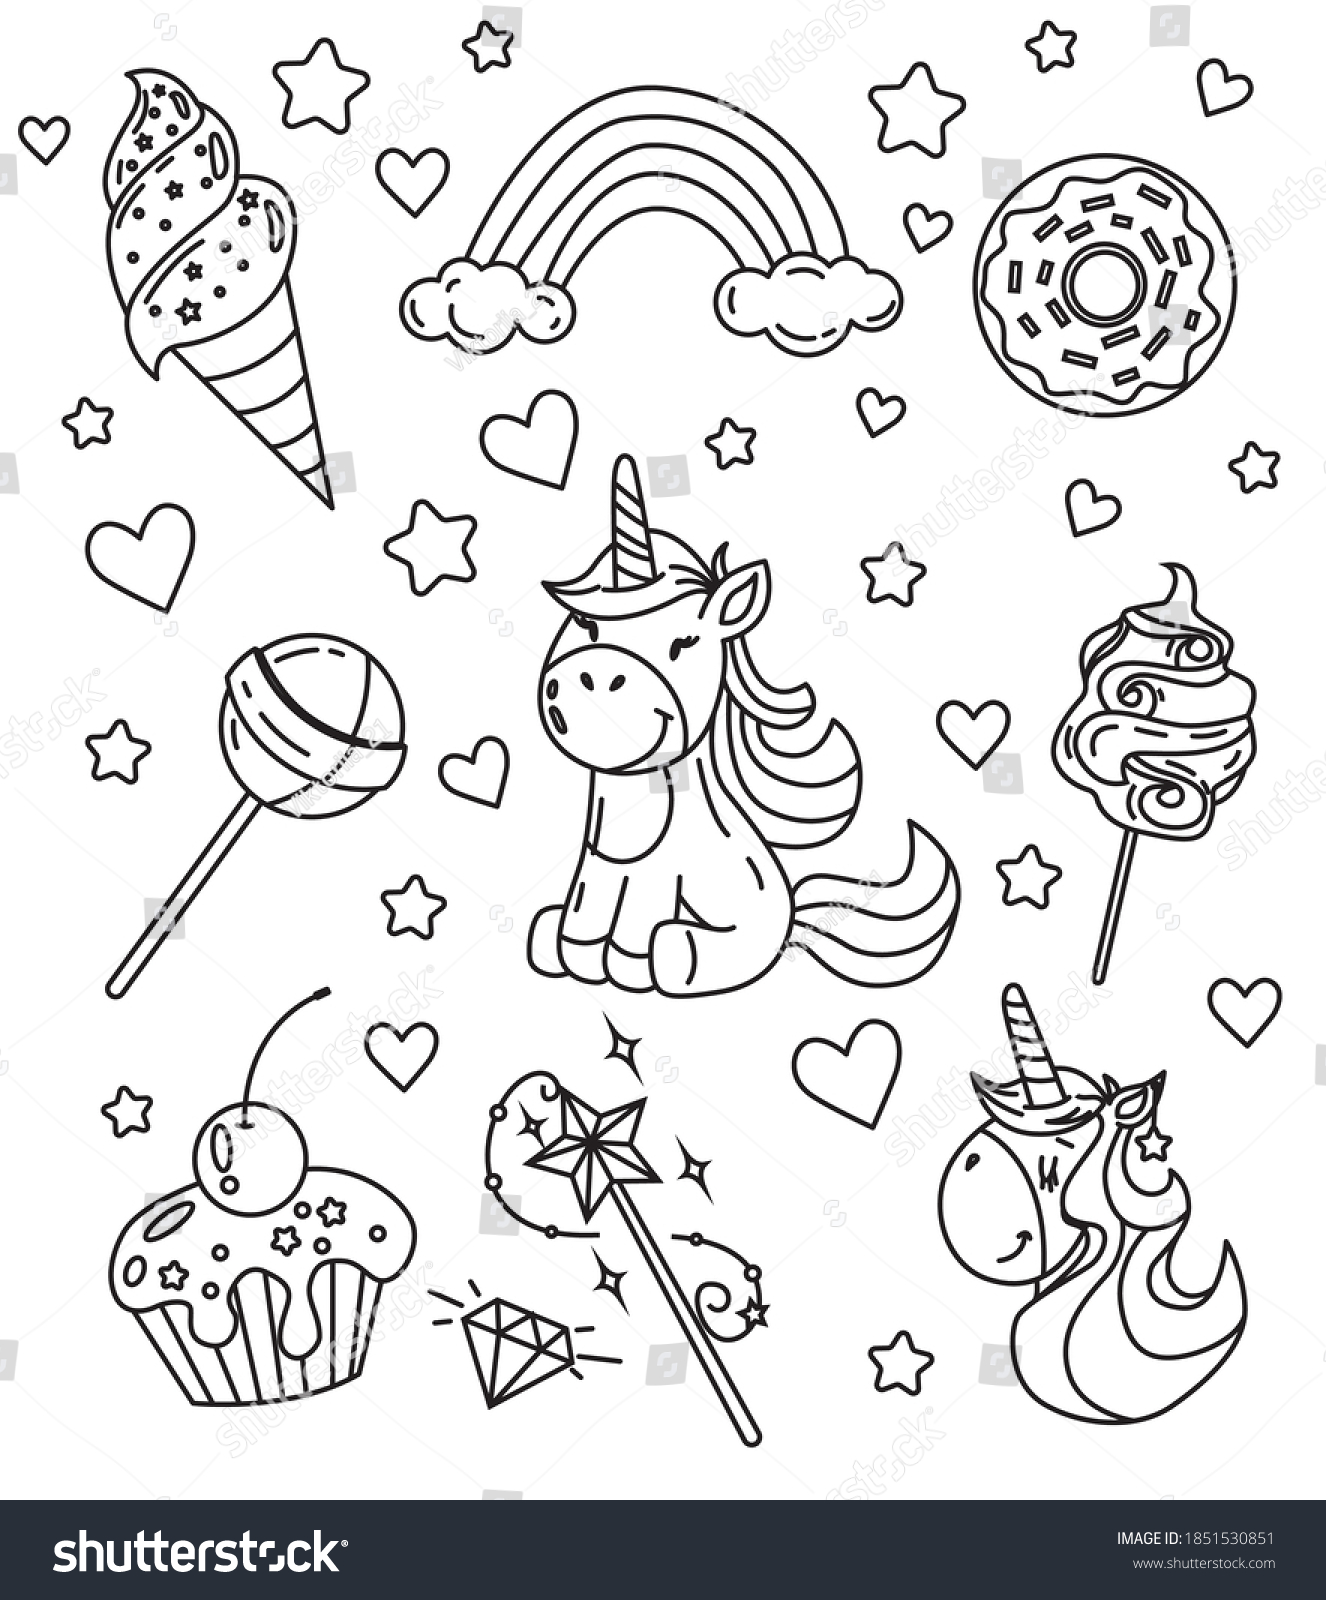 Coloring page antistress set unicorn ice stock vector royalty free